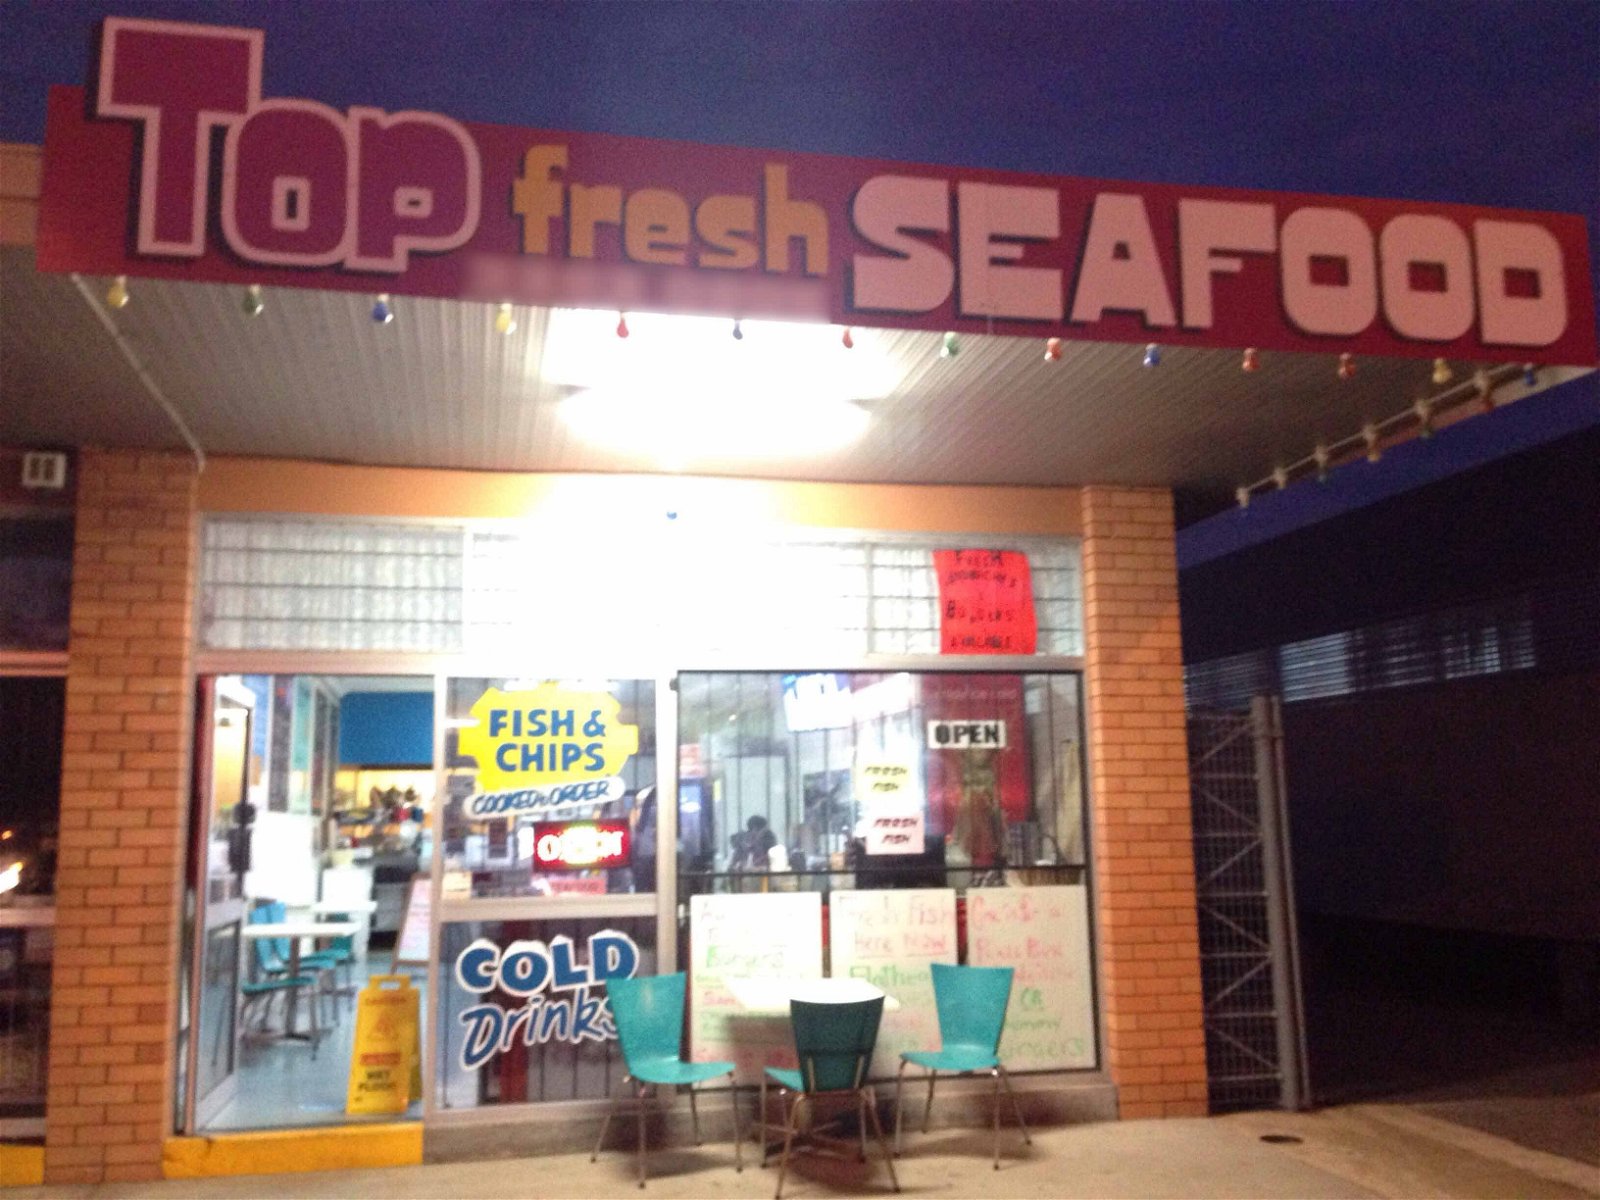 Top Fresh Seafood - Food Delivery Shop